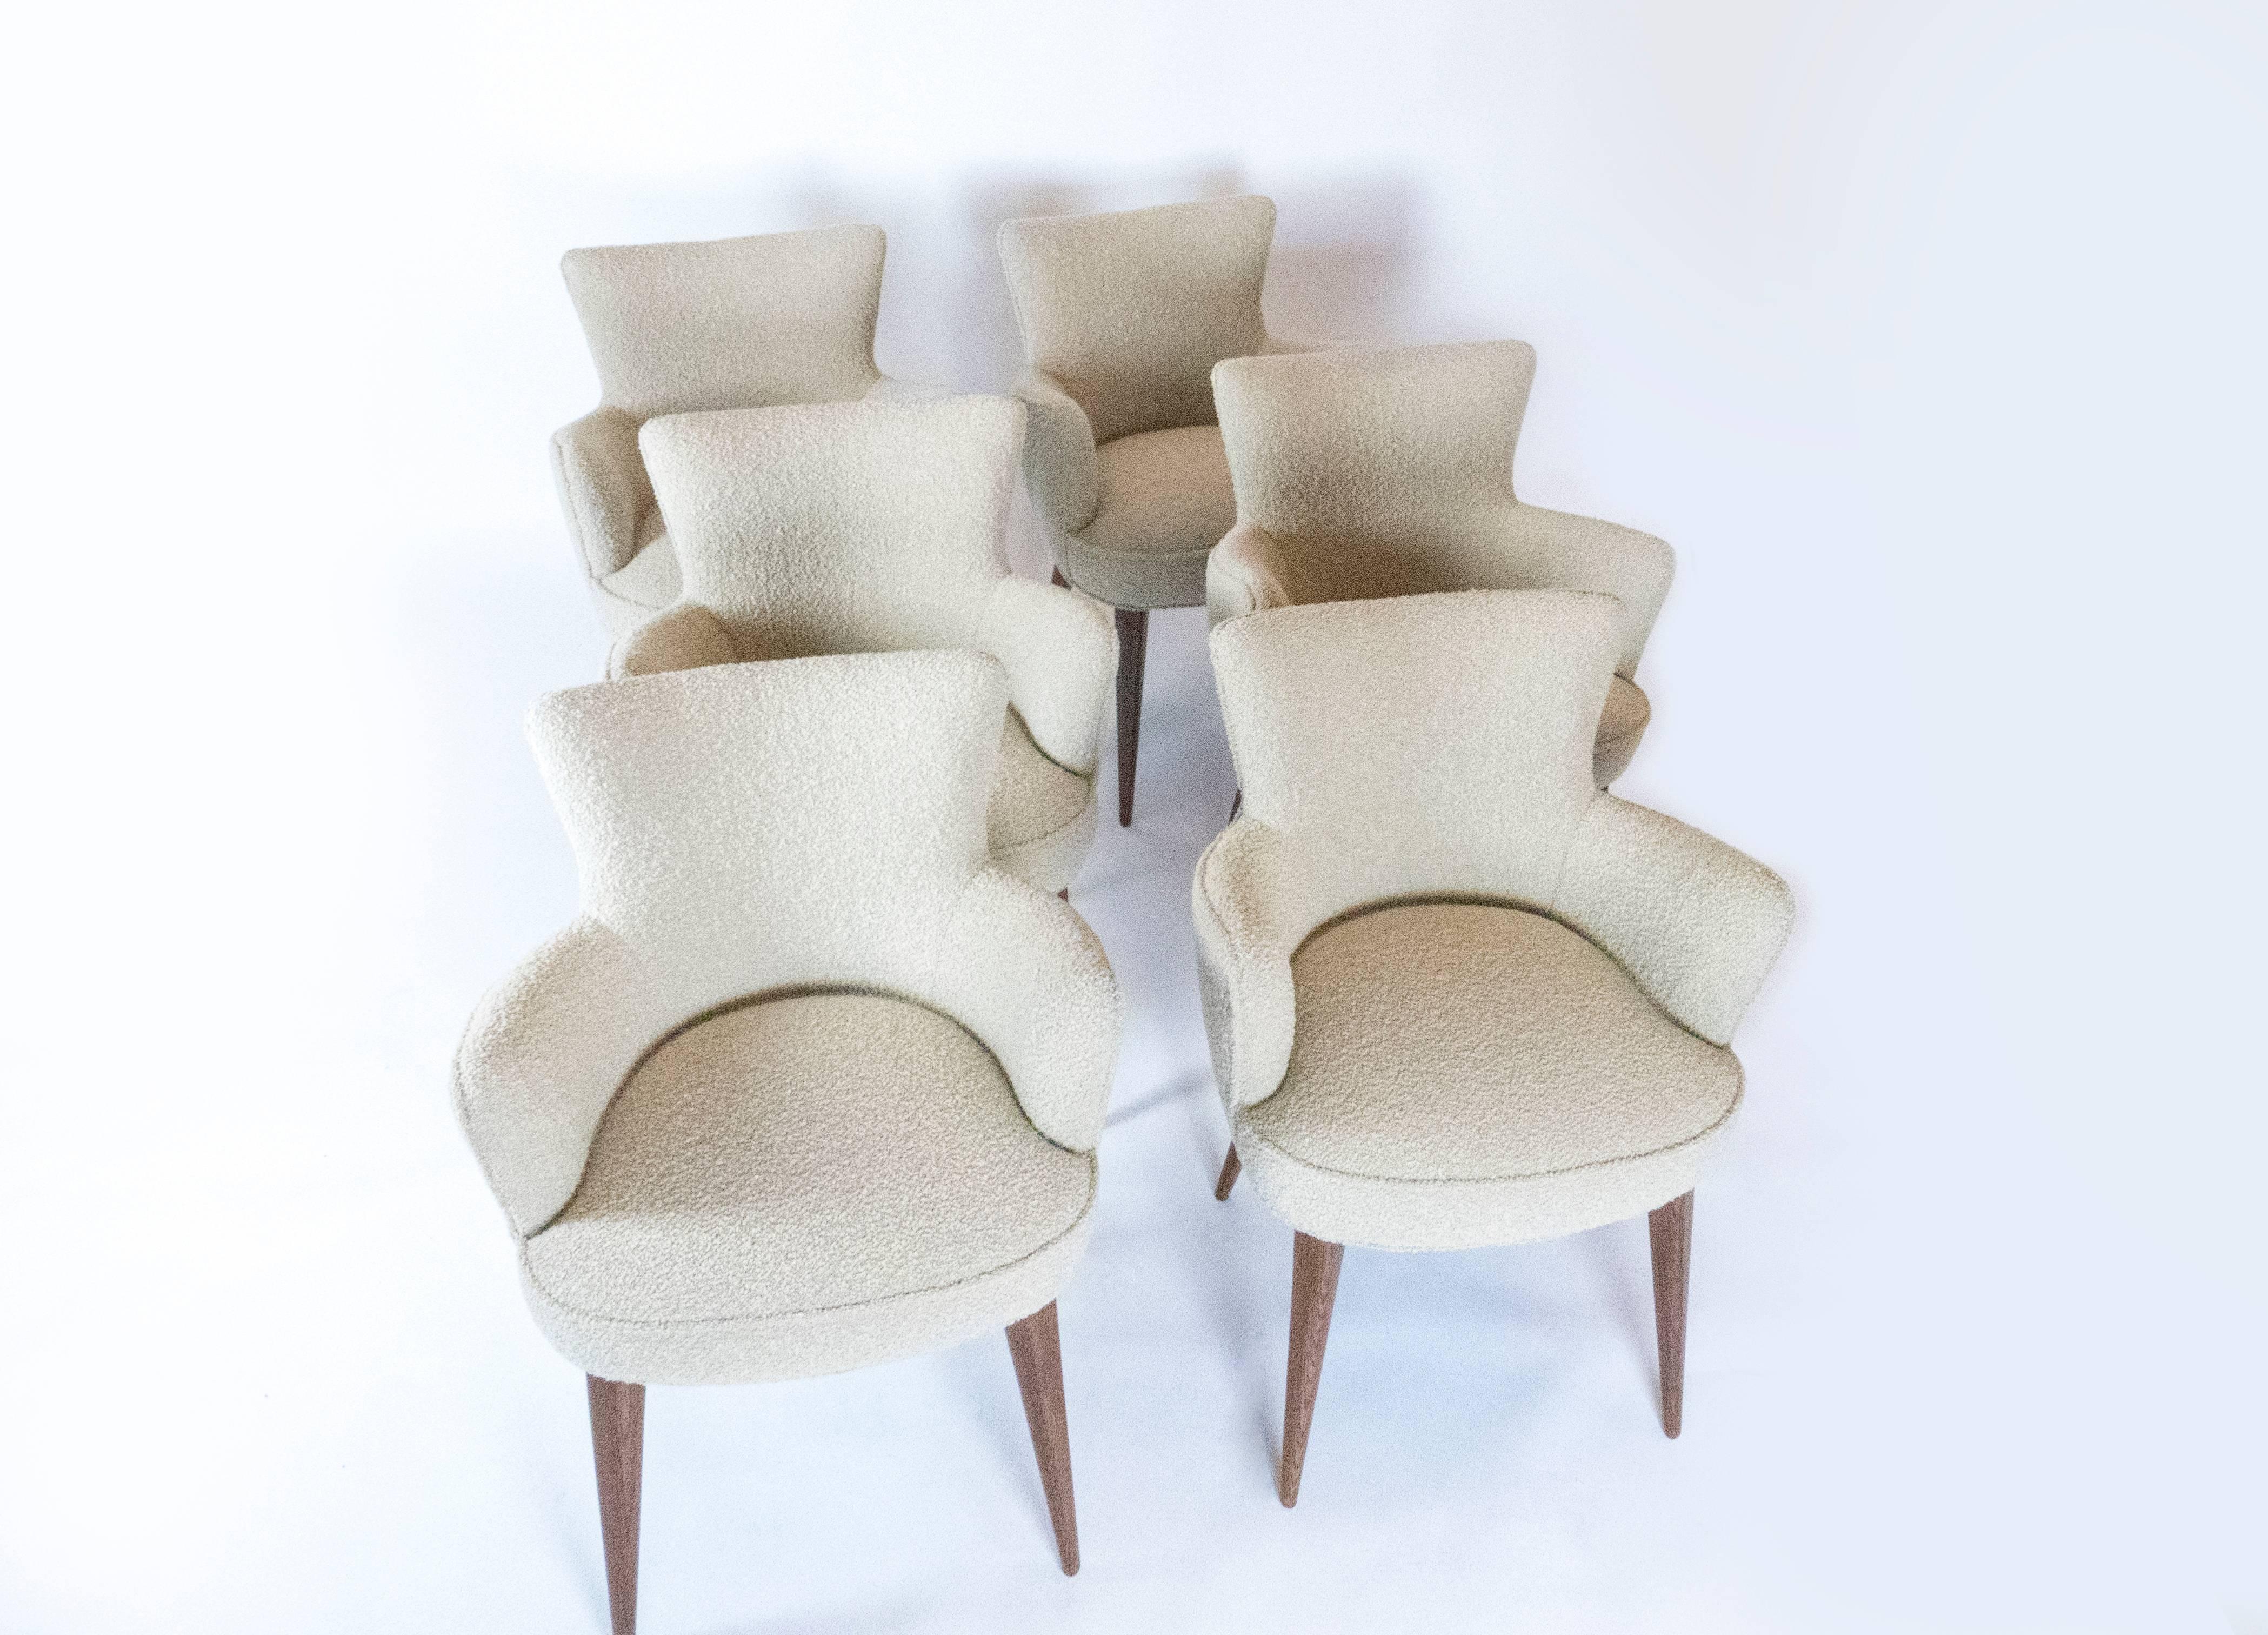 Contemporary Set of 14 Aube Chairs, by Bourgeois Boheme Atelier